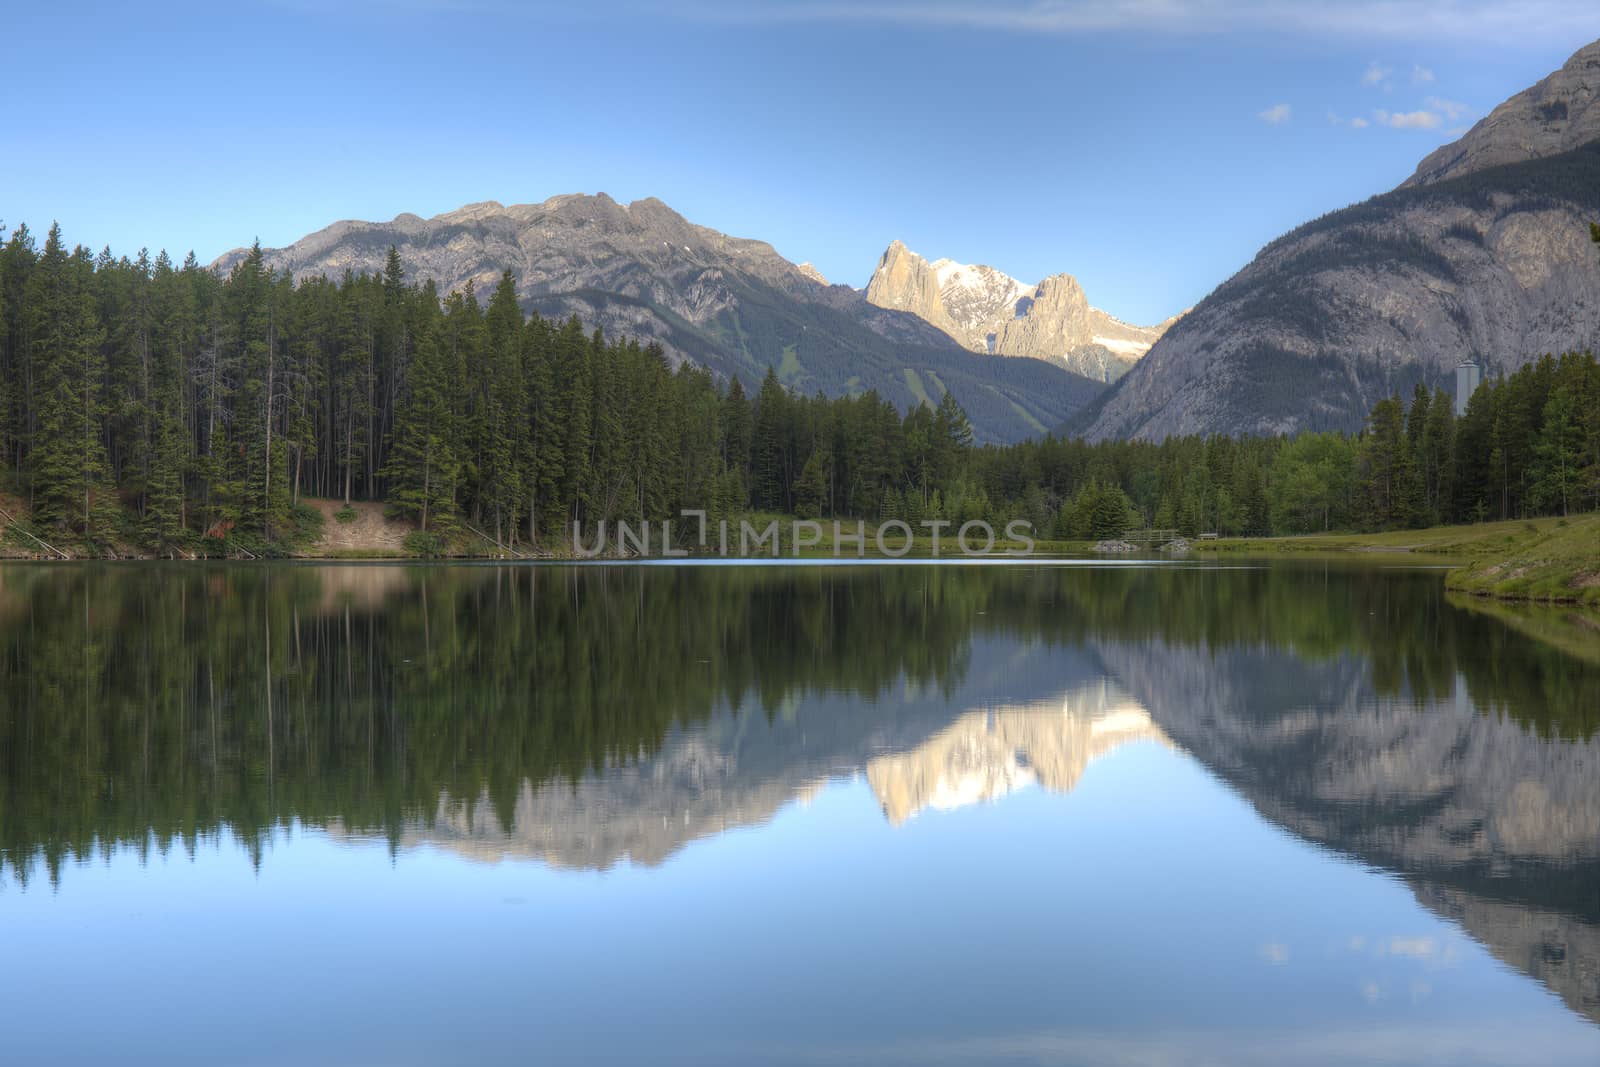 Mountains and boreal forest reflect on the surface of Johnson Lake - Banff National Park, Alberta, Canada